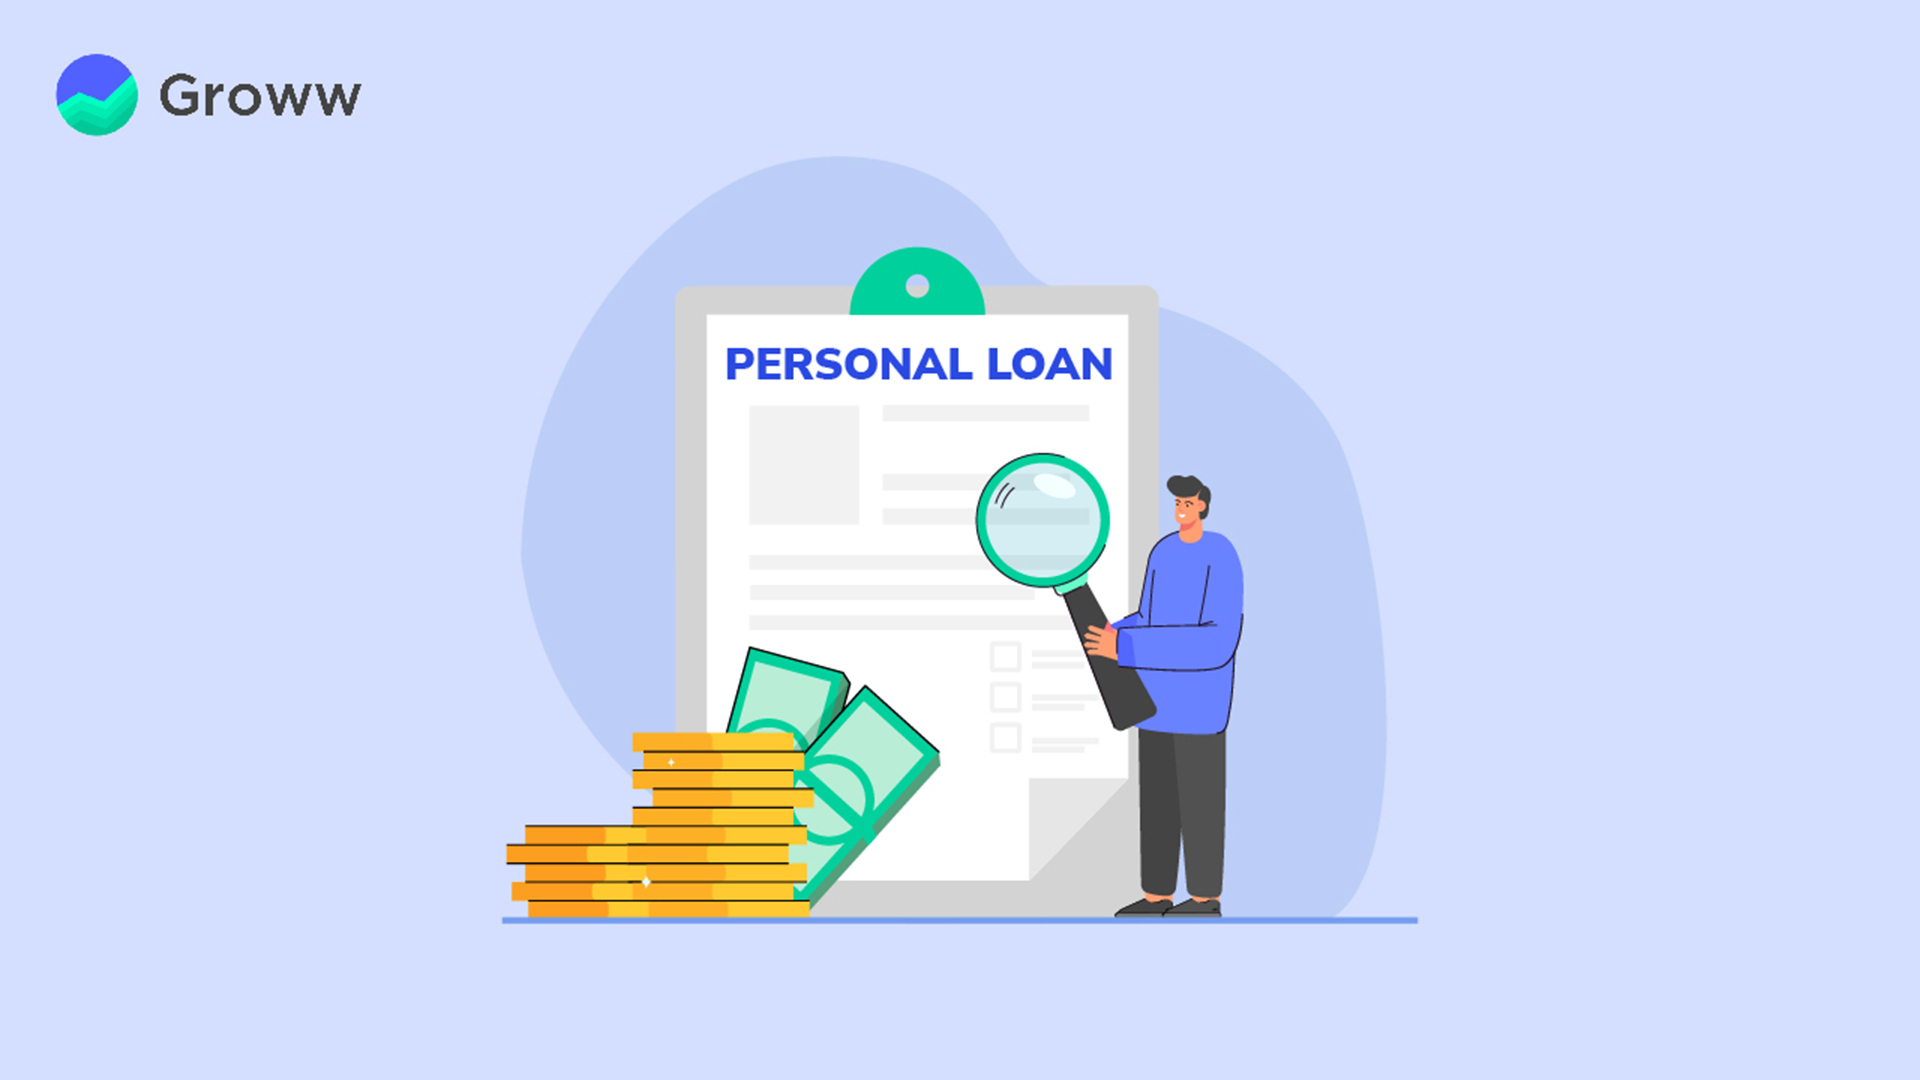 How to Get a Personal Loan?